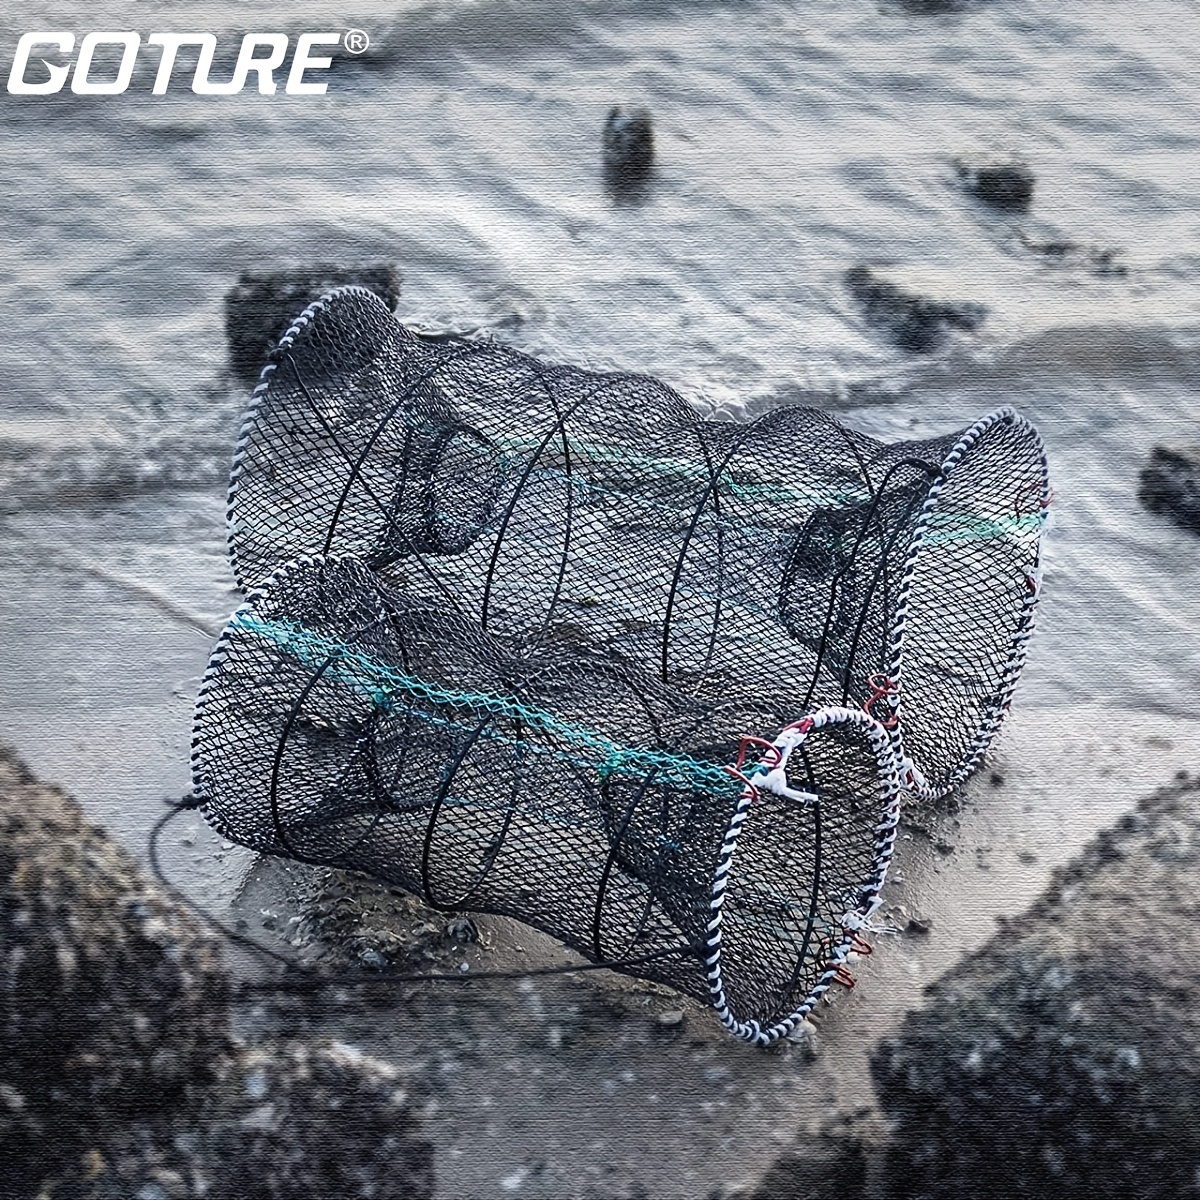 Collapsible Lobster Pots Crab Pots Bait and Tackle Crab Traps